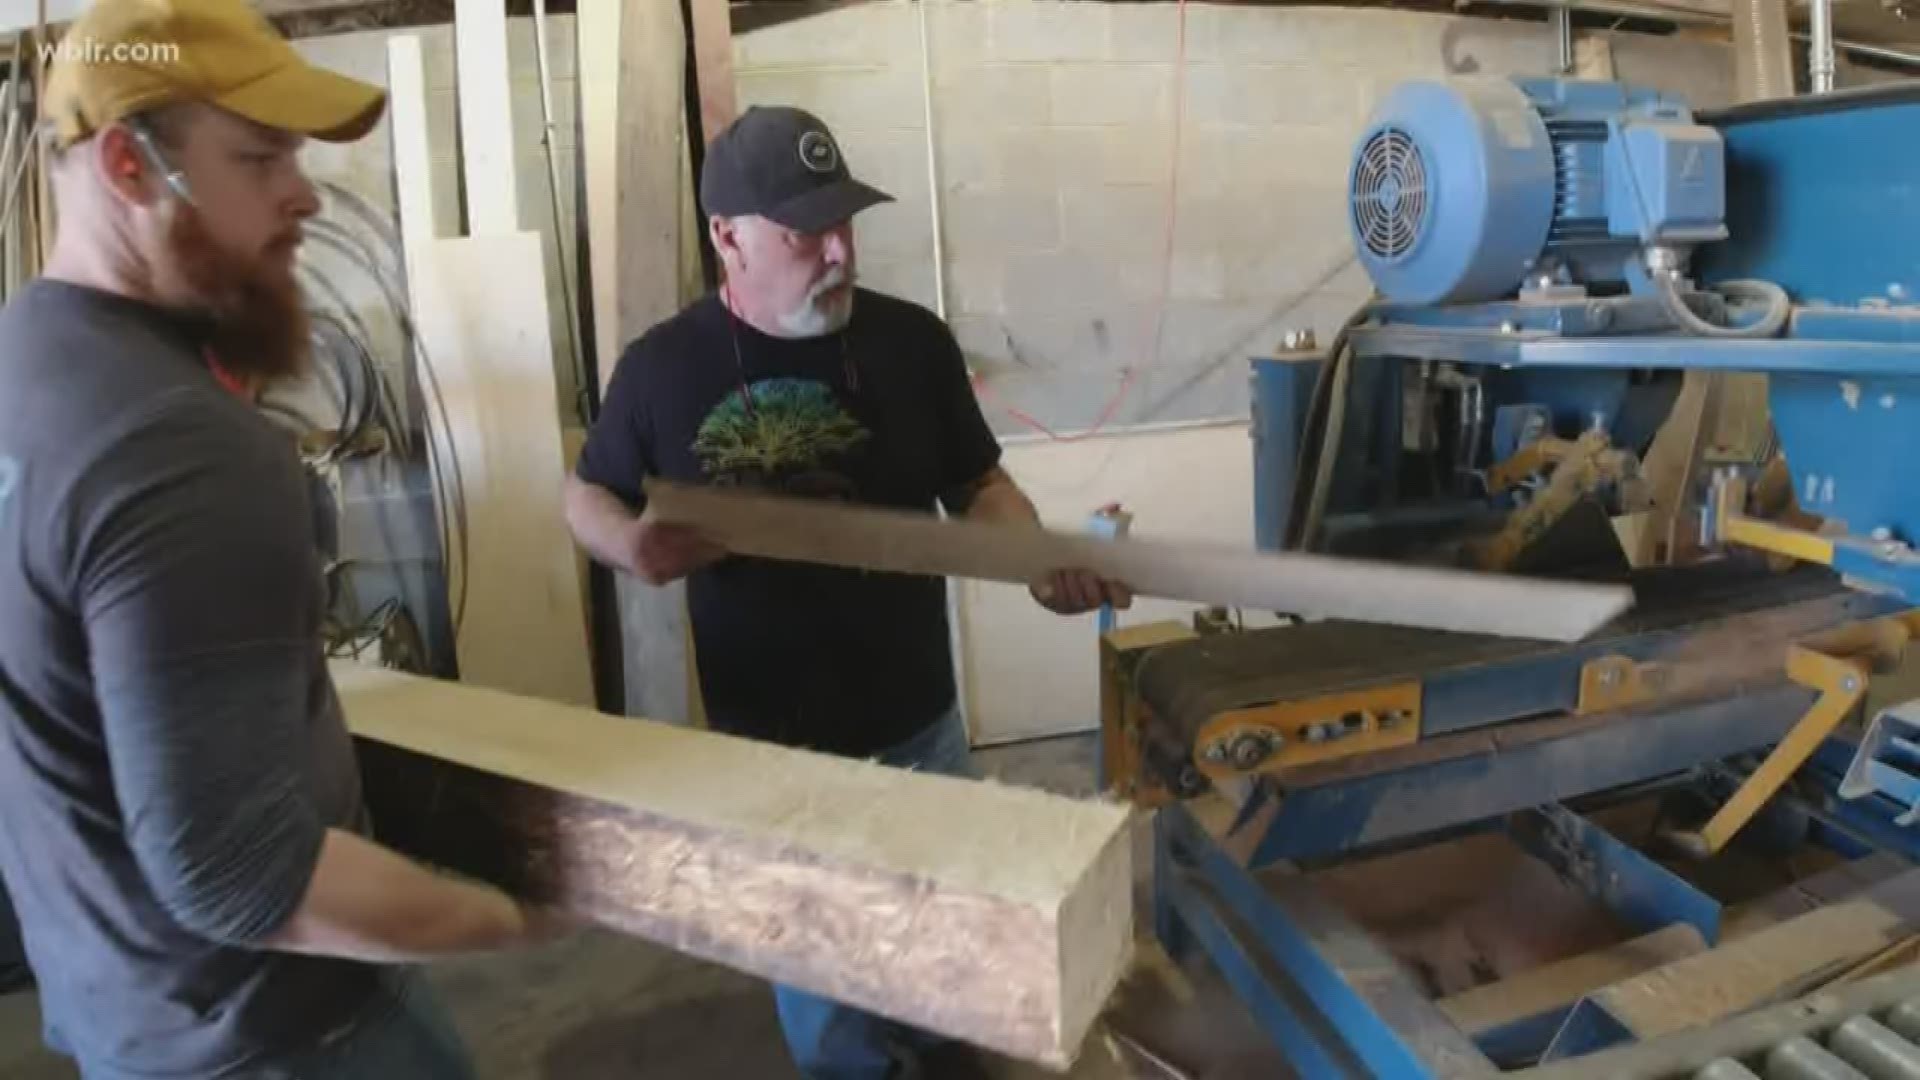 It took three years to get to the point of finally seeing the product, but an East Tennessee company is the first in the world to produce it.